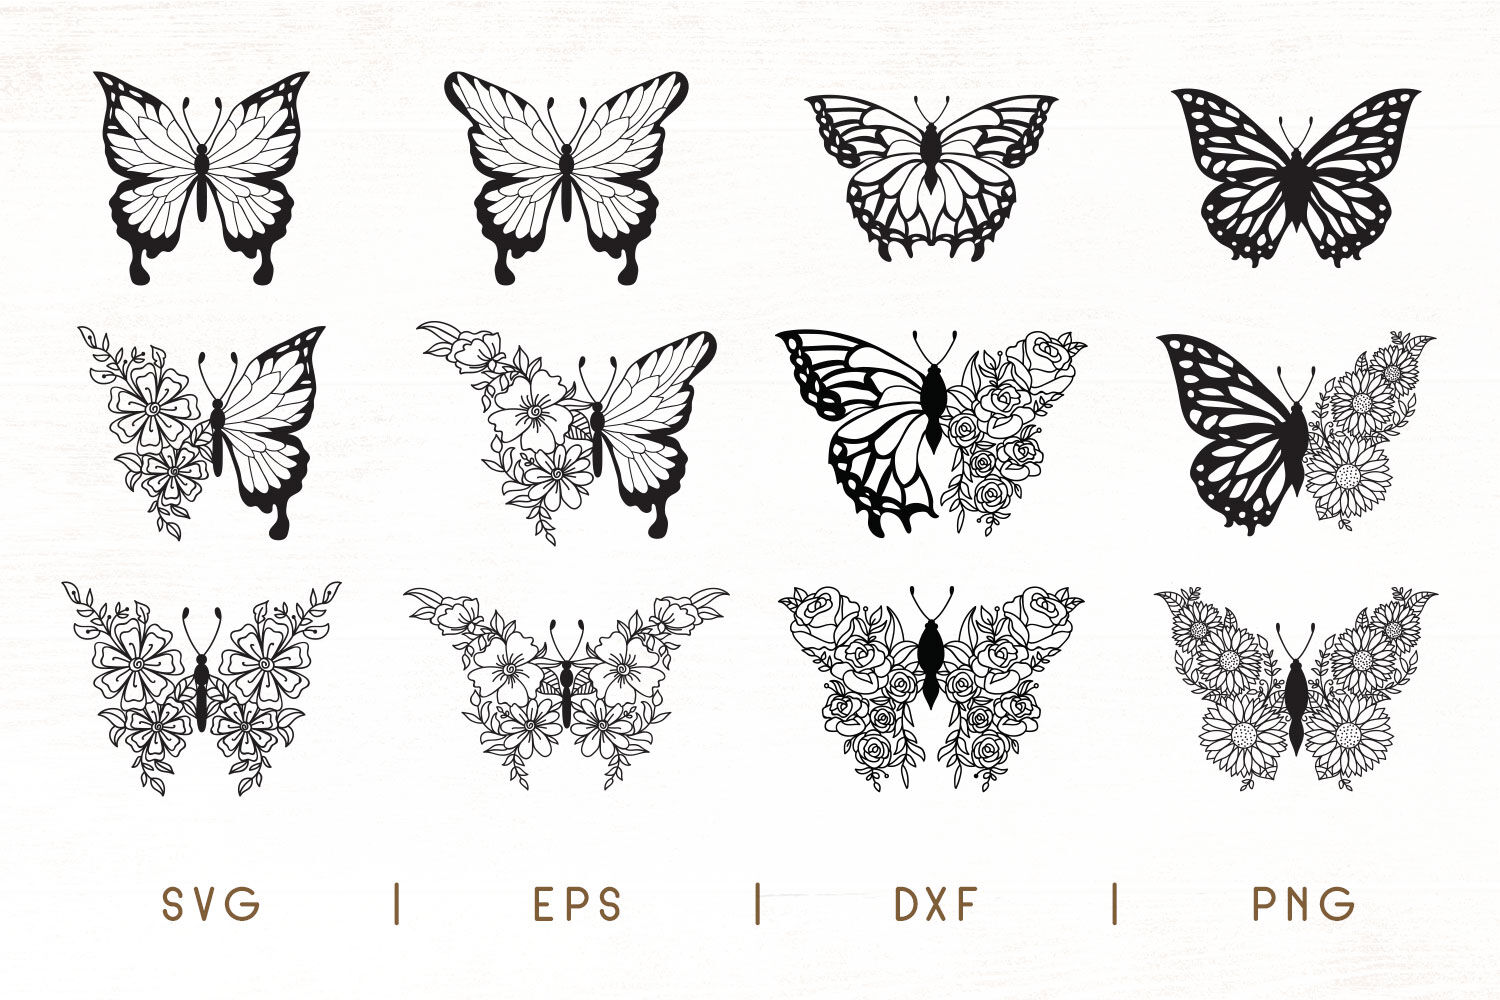 Flower Butterfly SVG - Floral Butterfly Pack of 12 Designs By Dasagani